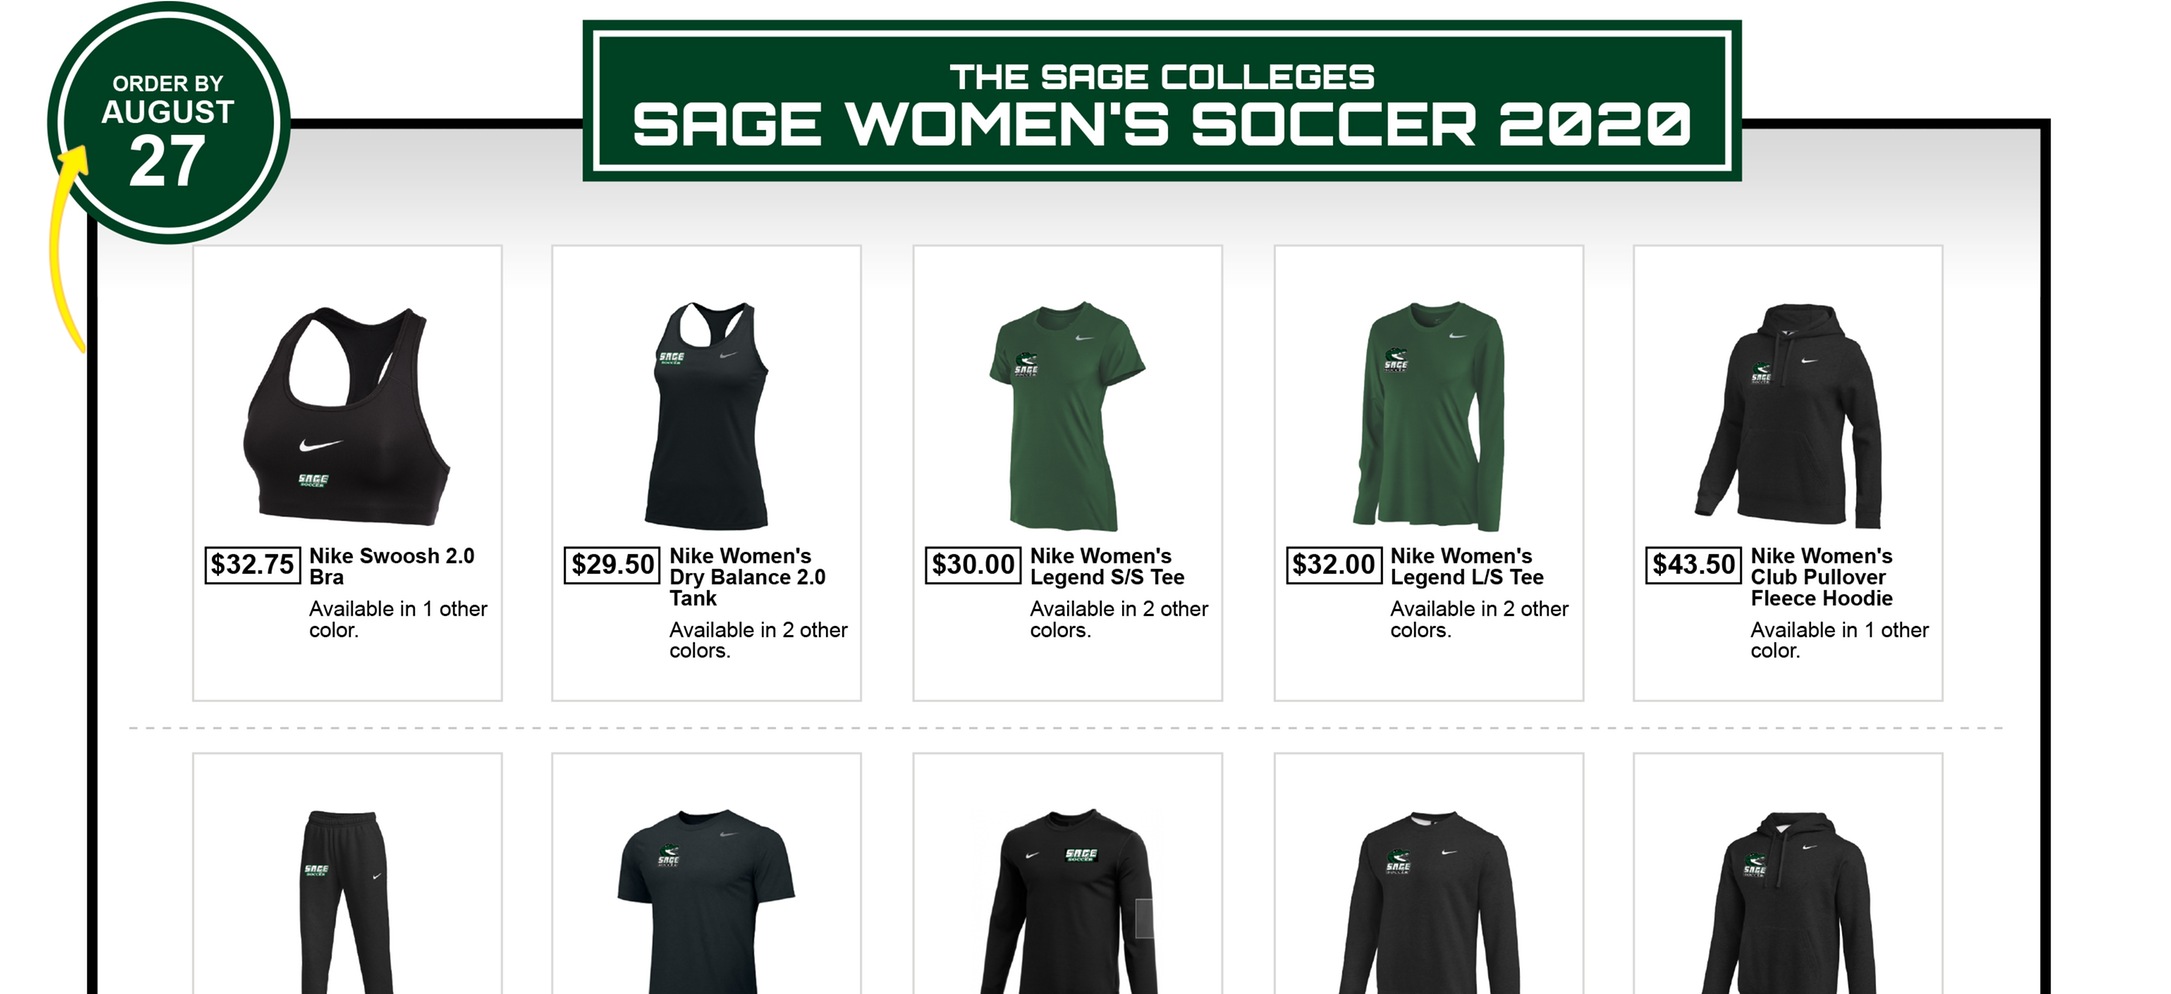 Help Support Sage's Women's Soccer Team with a purchase on their Team Store, Aug. 17-27